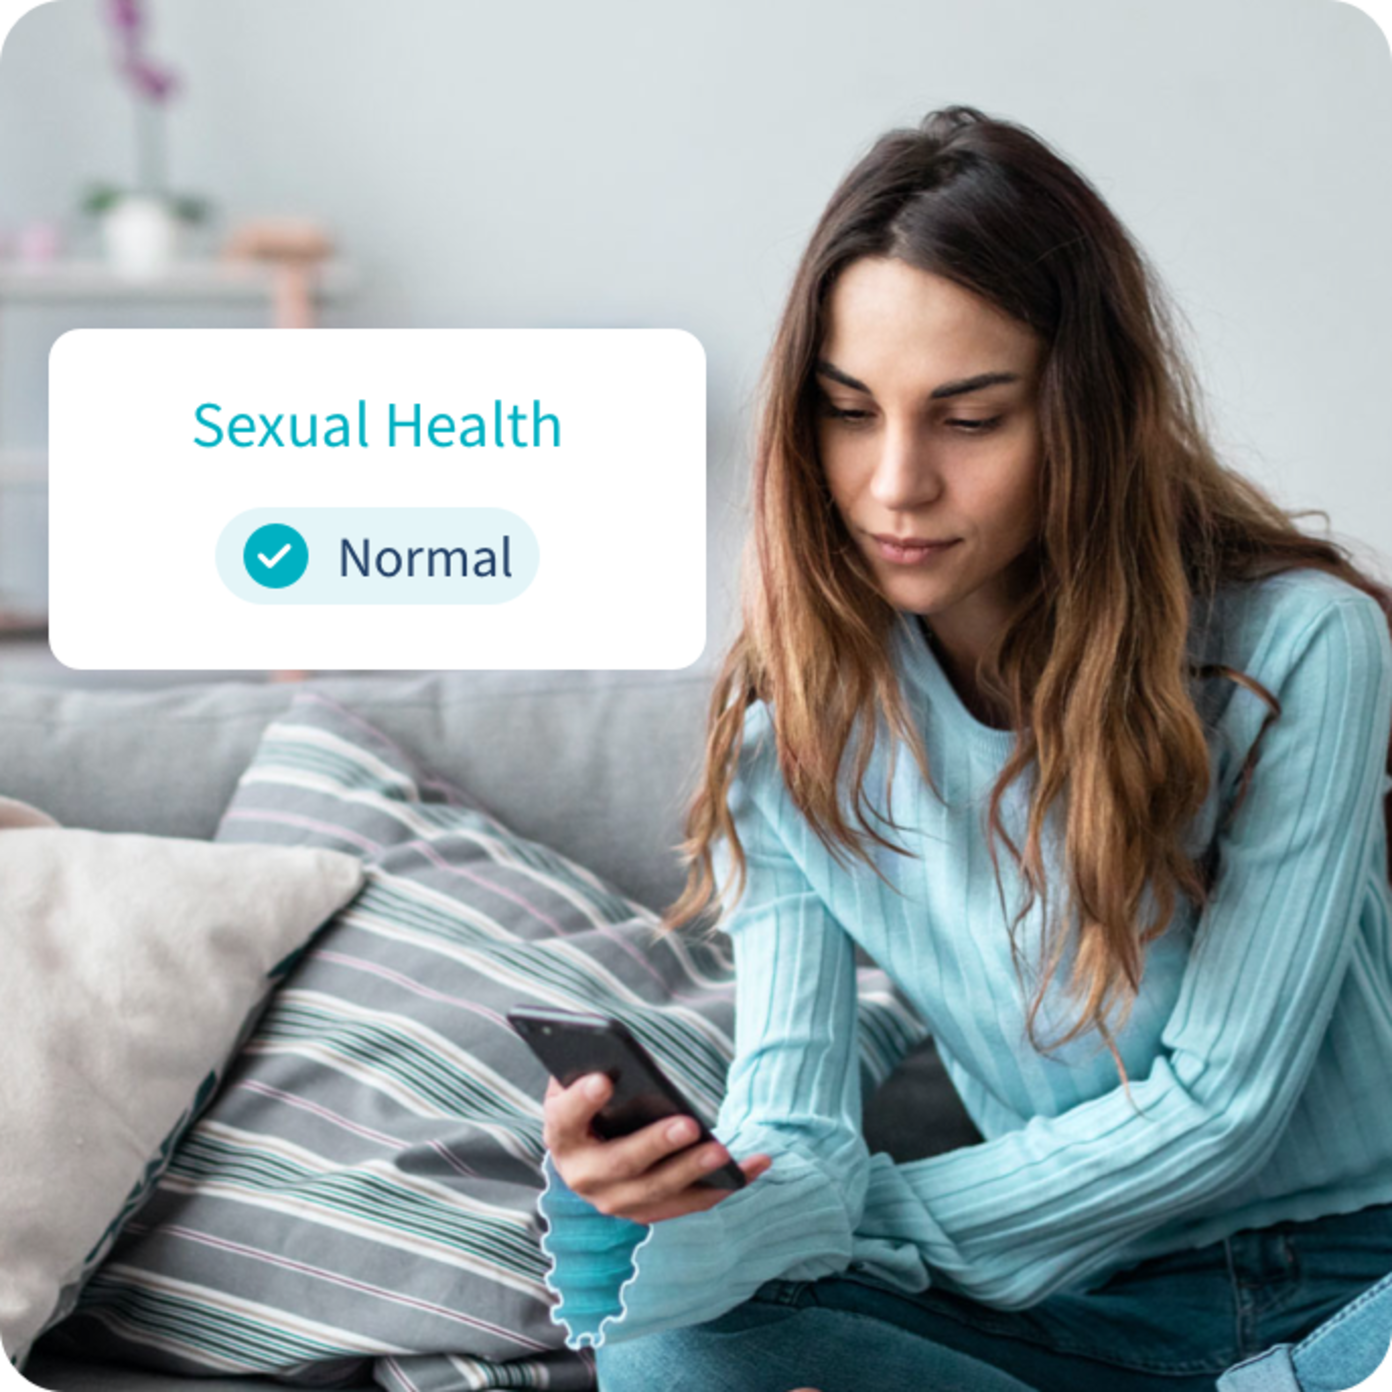 Woman checking phone, normal sexual health result 